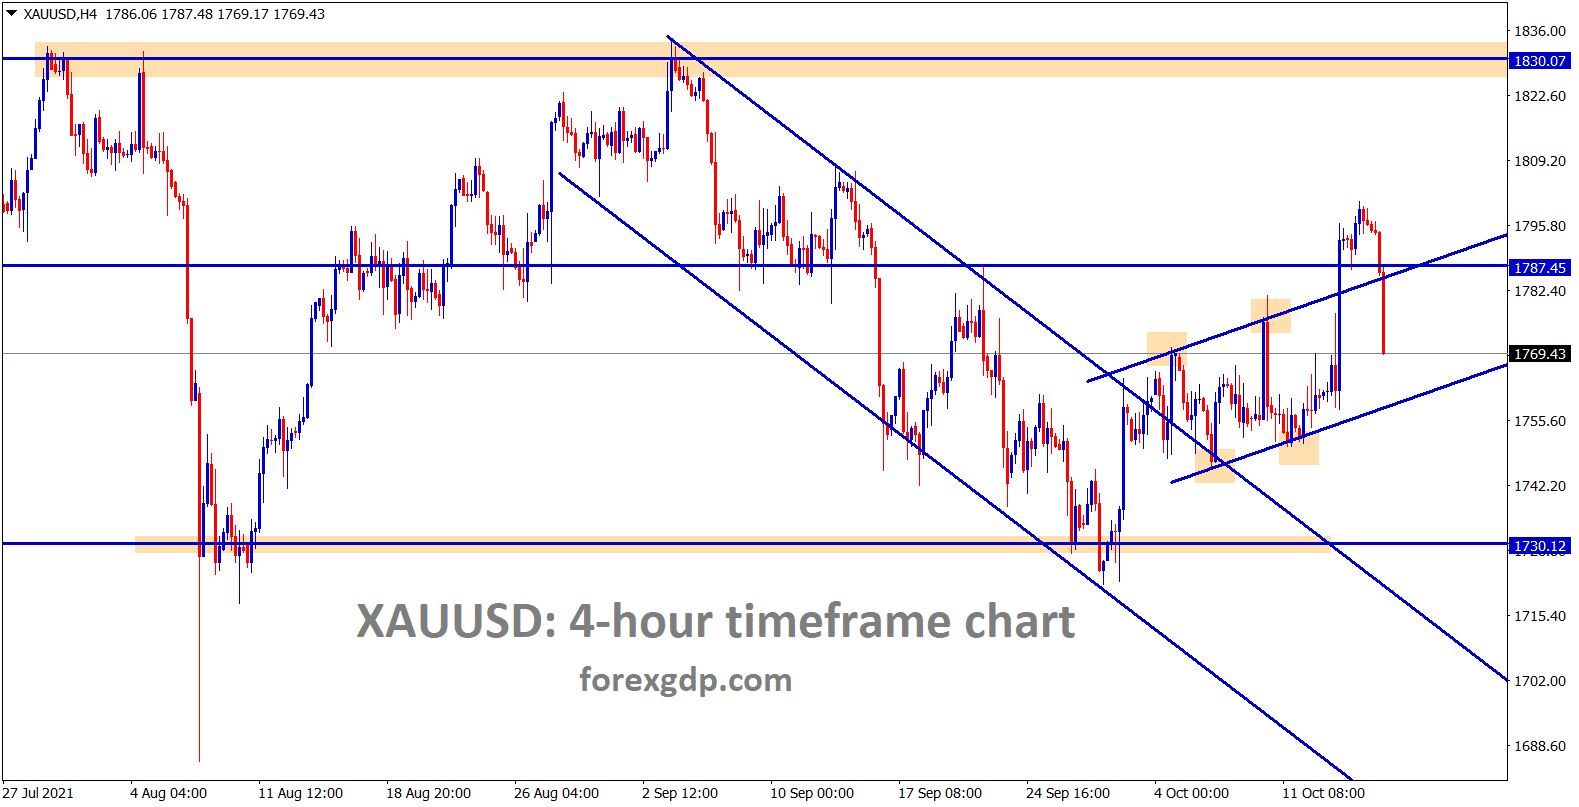 Gold is moving in a small ascending channel range